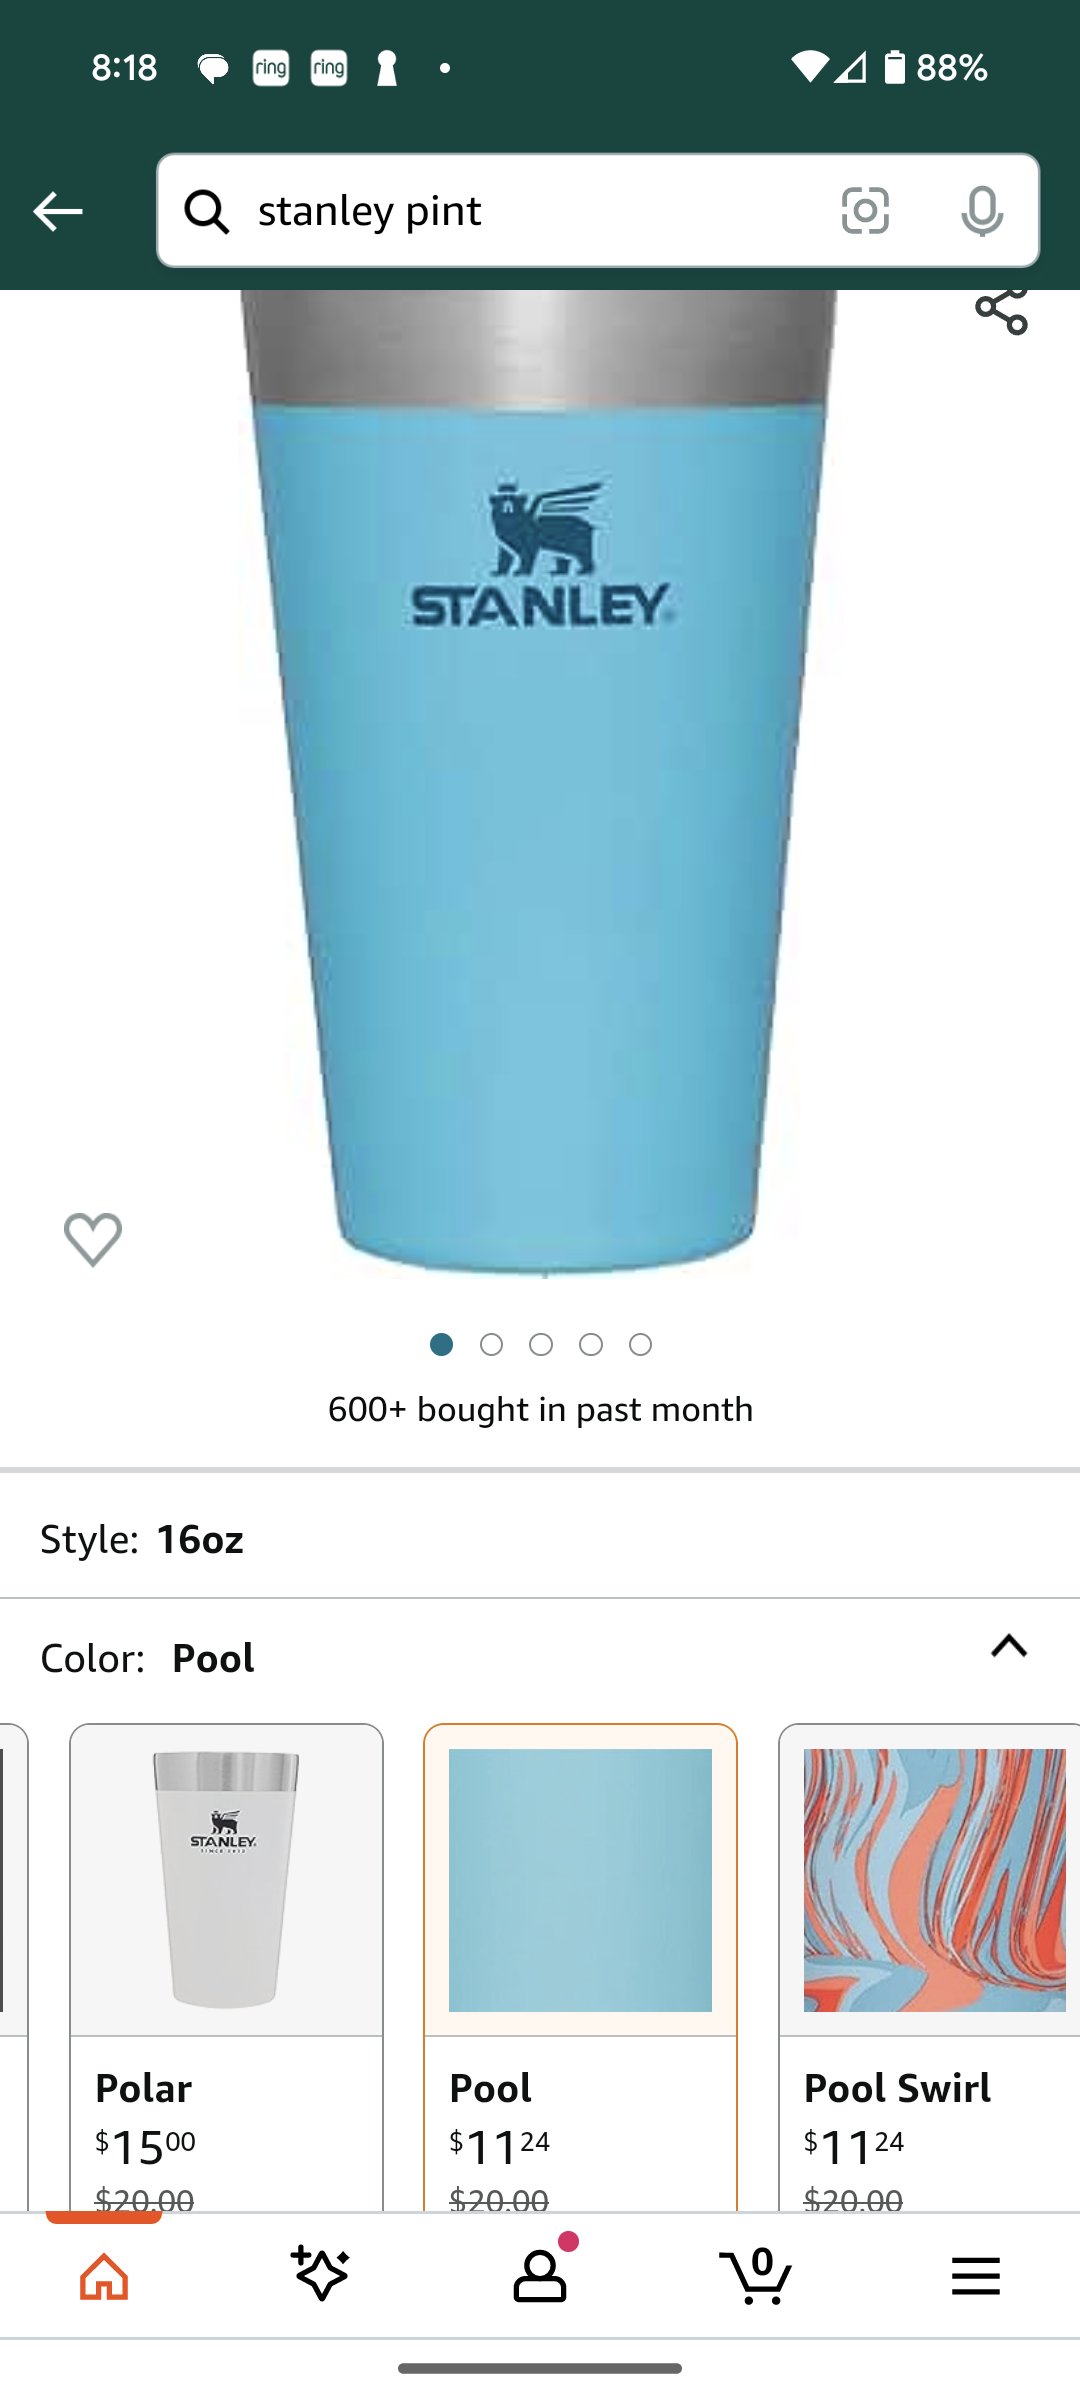 Select Stanley Drinkware Products on sale at Amazon 25-44% off